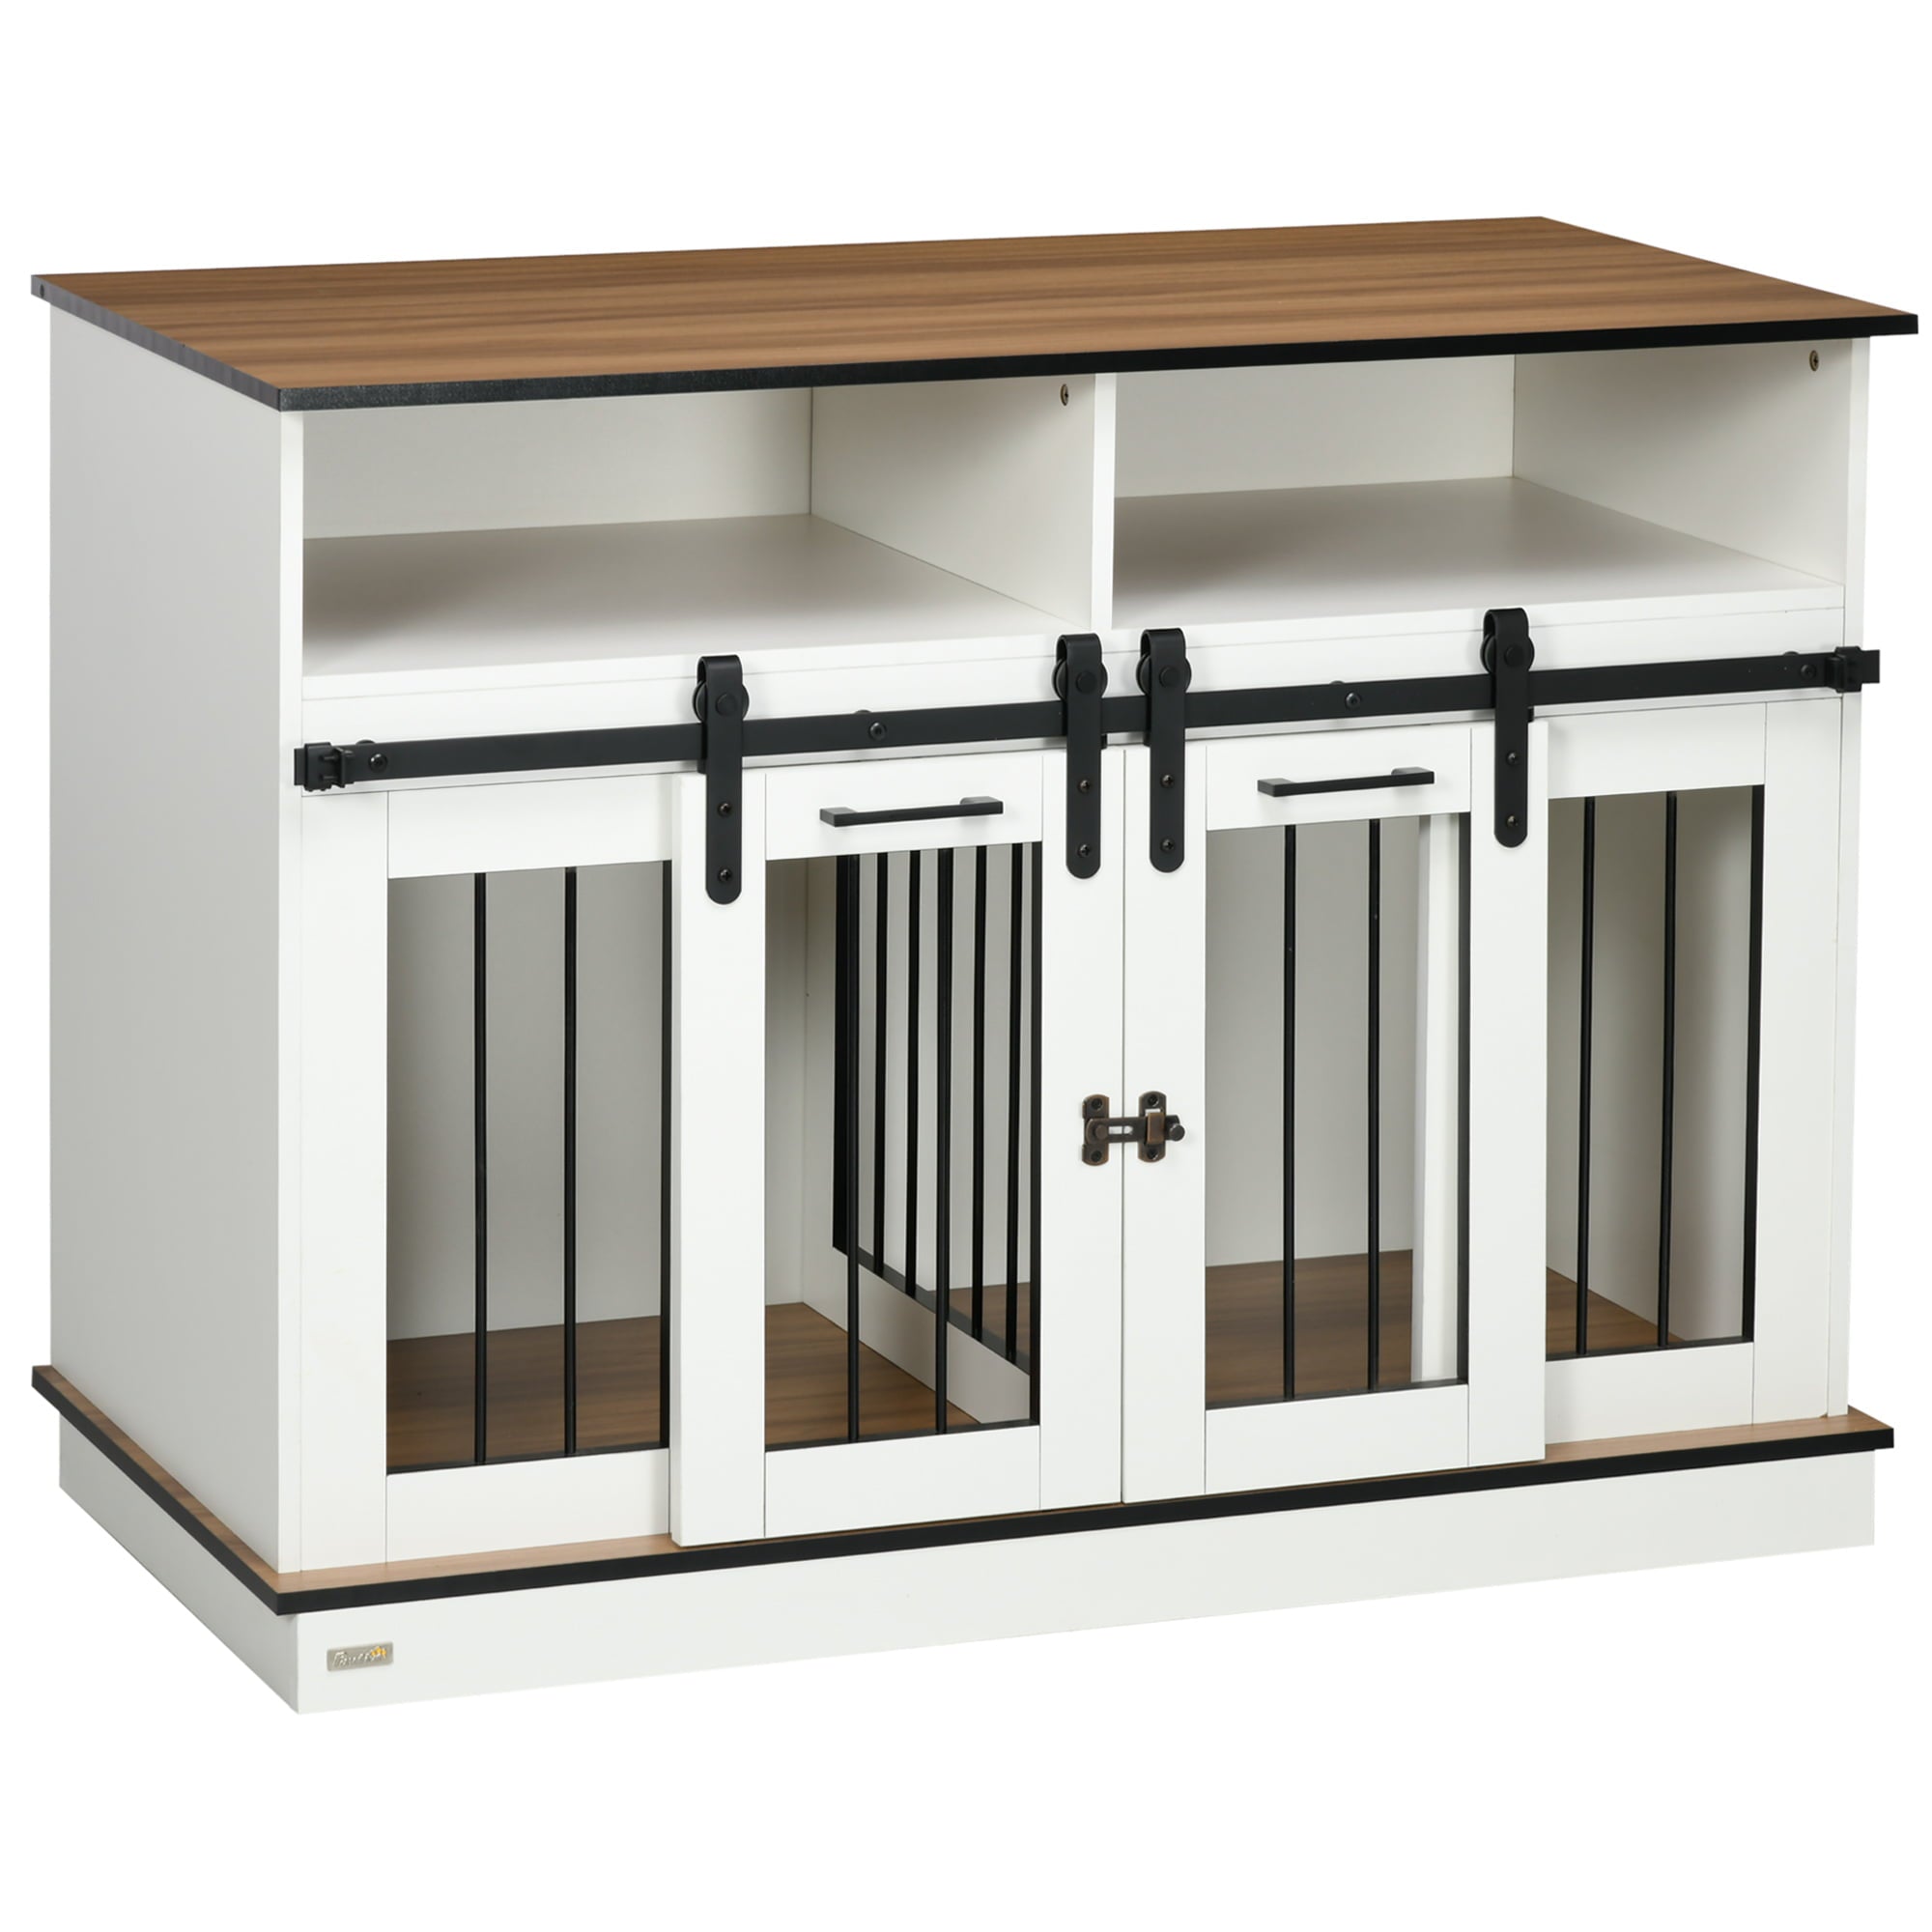 PawHut Dog Crate Furniture for Large Dogs， Double Dog Kennel for Small Dogs with Shelves， Sliding Doors， 47